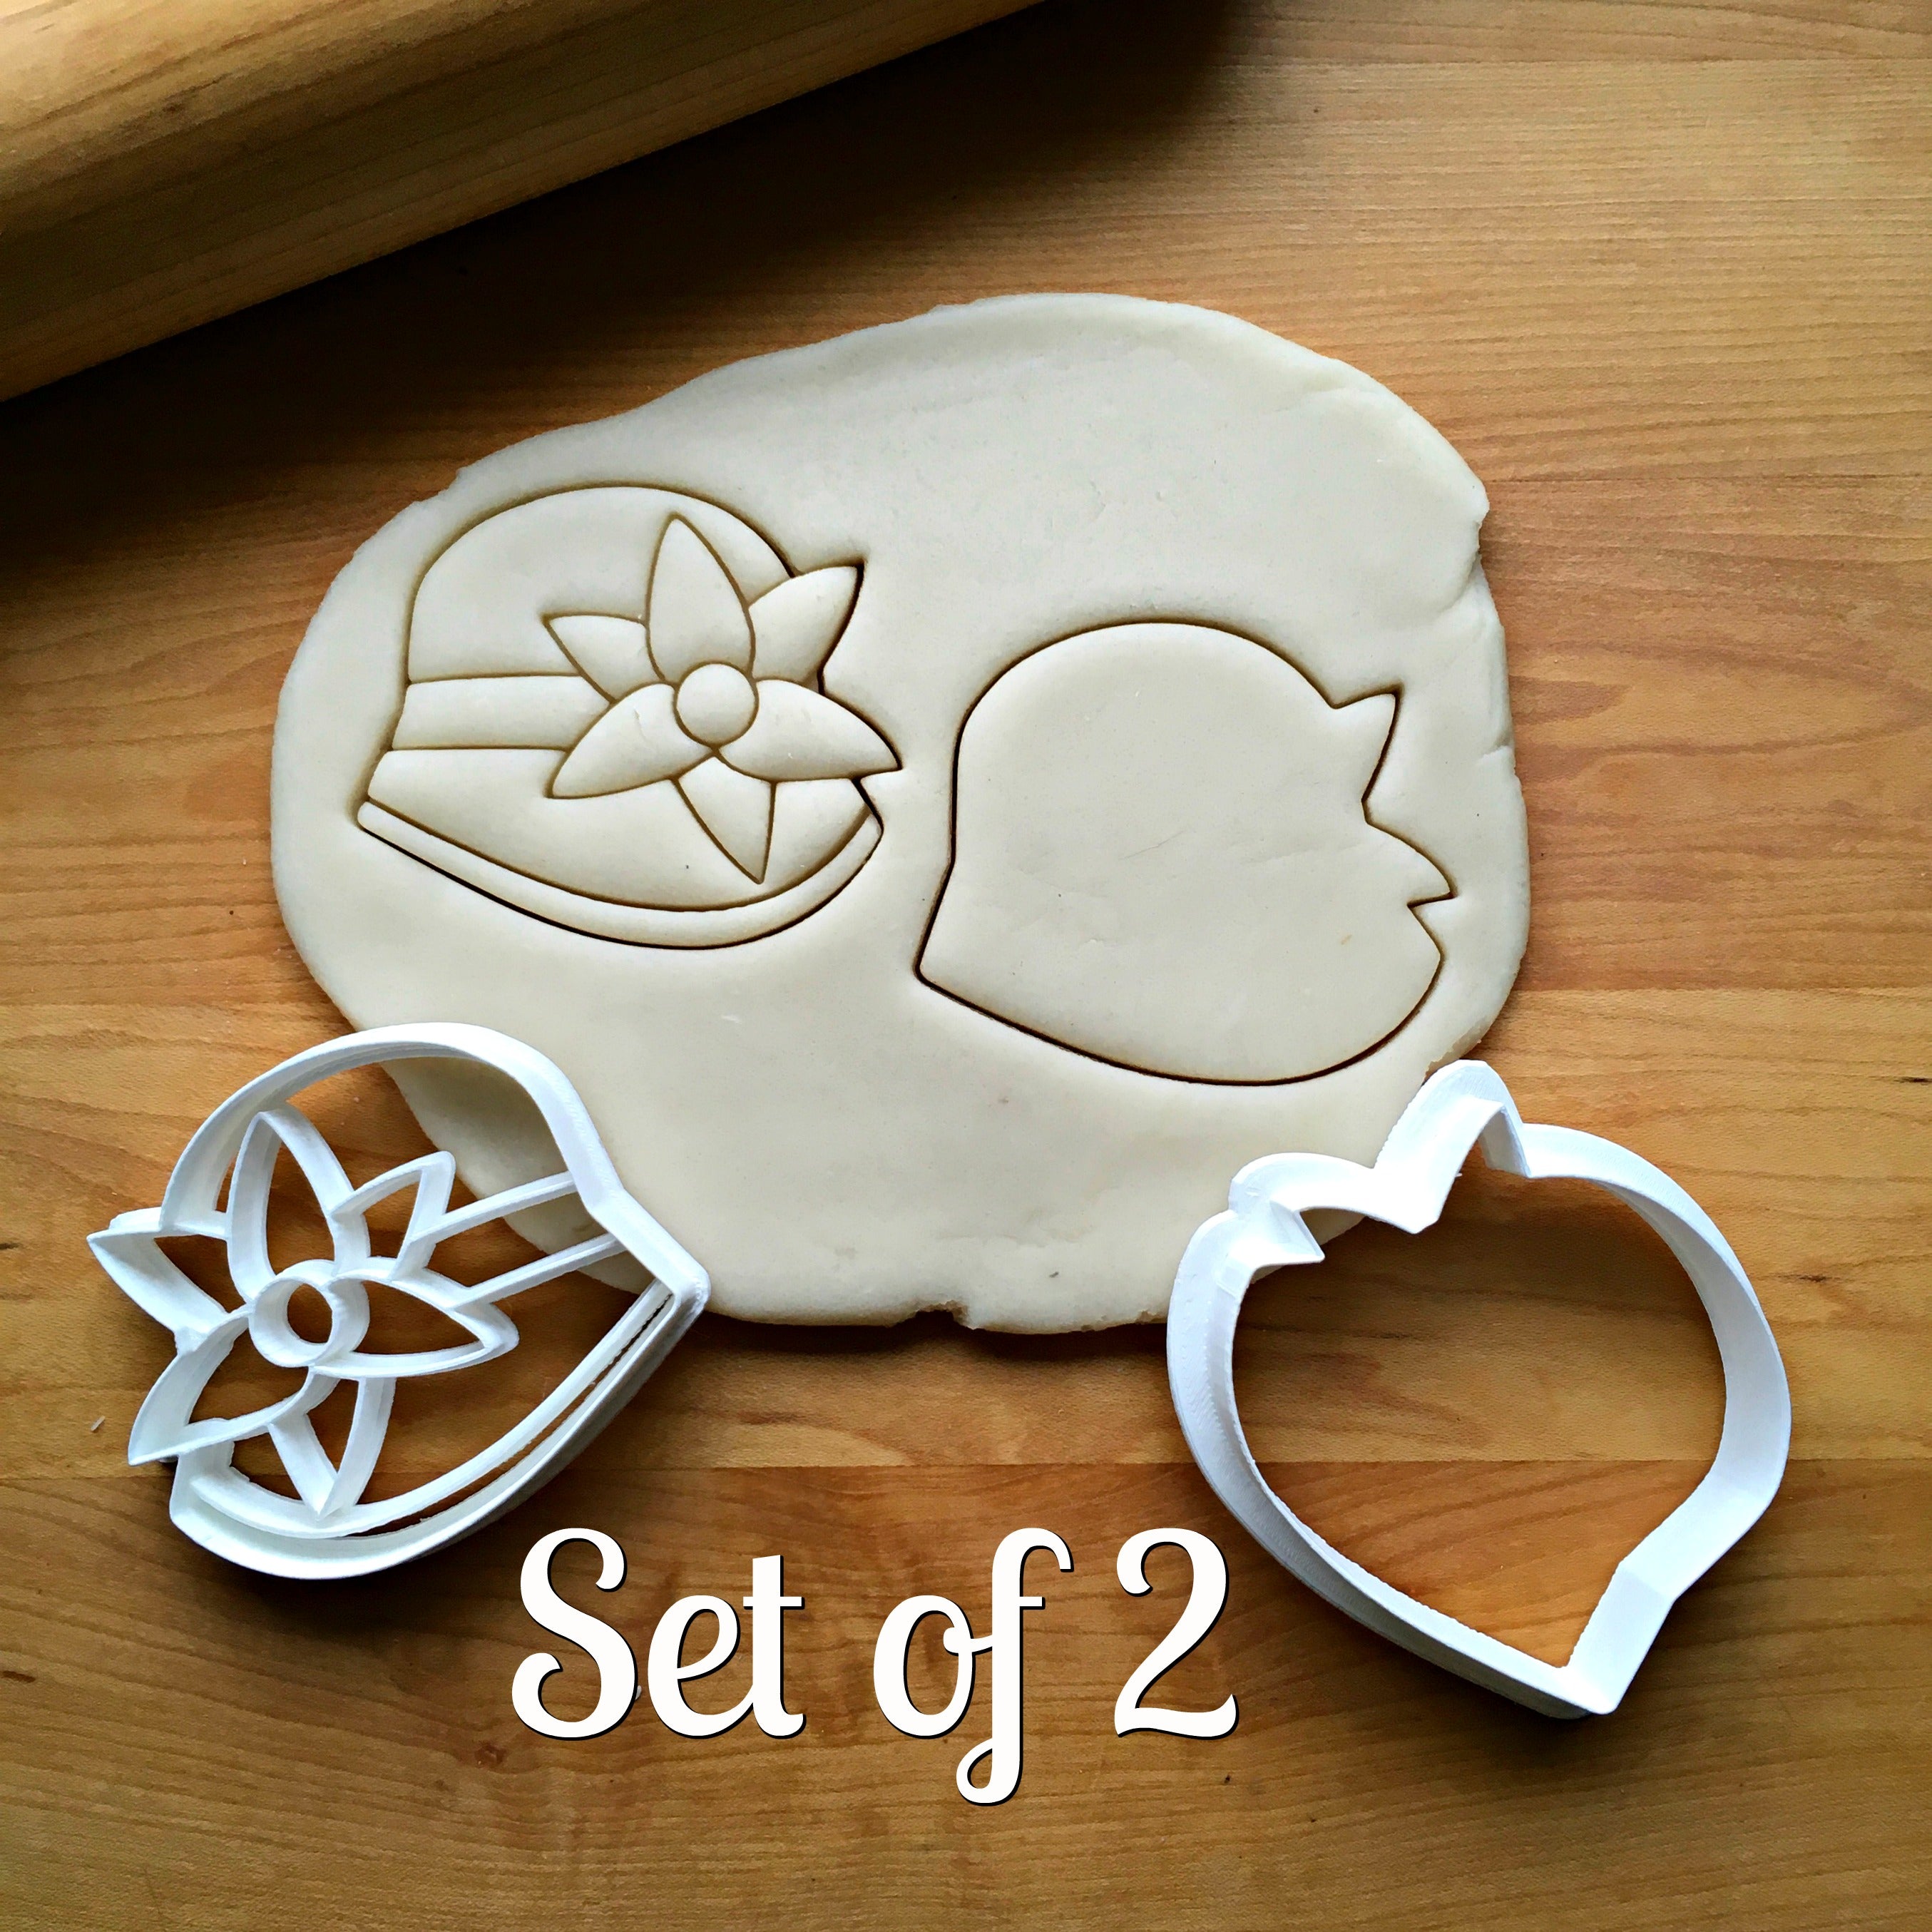 Set of 2 Cloche Hat with Flower Cookie Cutters/Dishwasher Safe